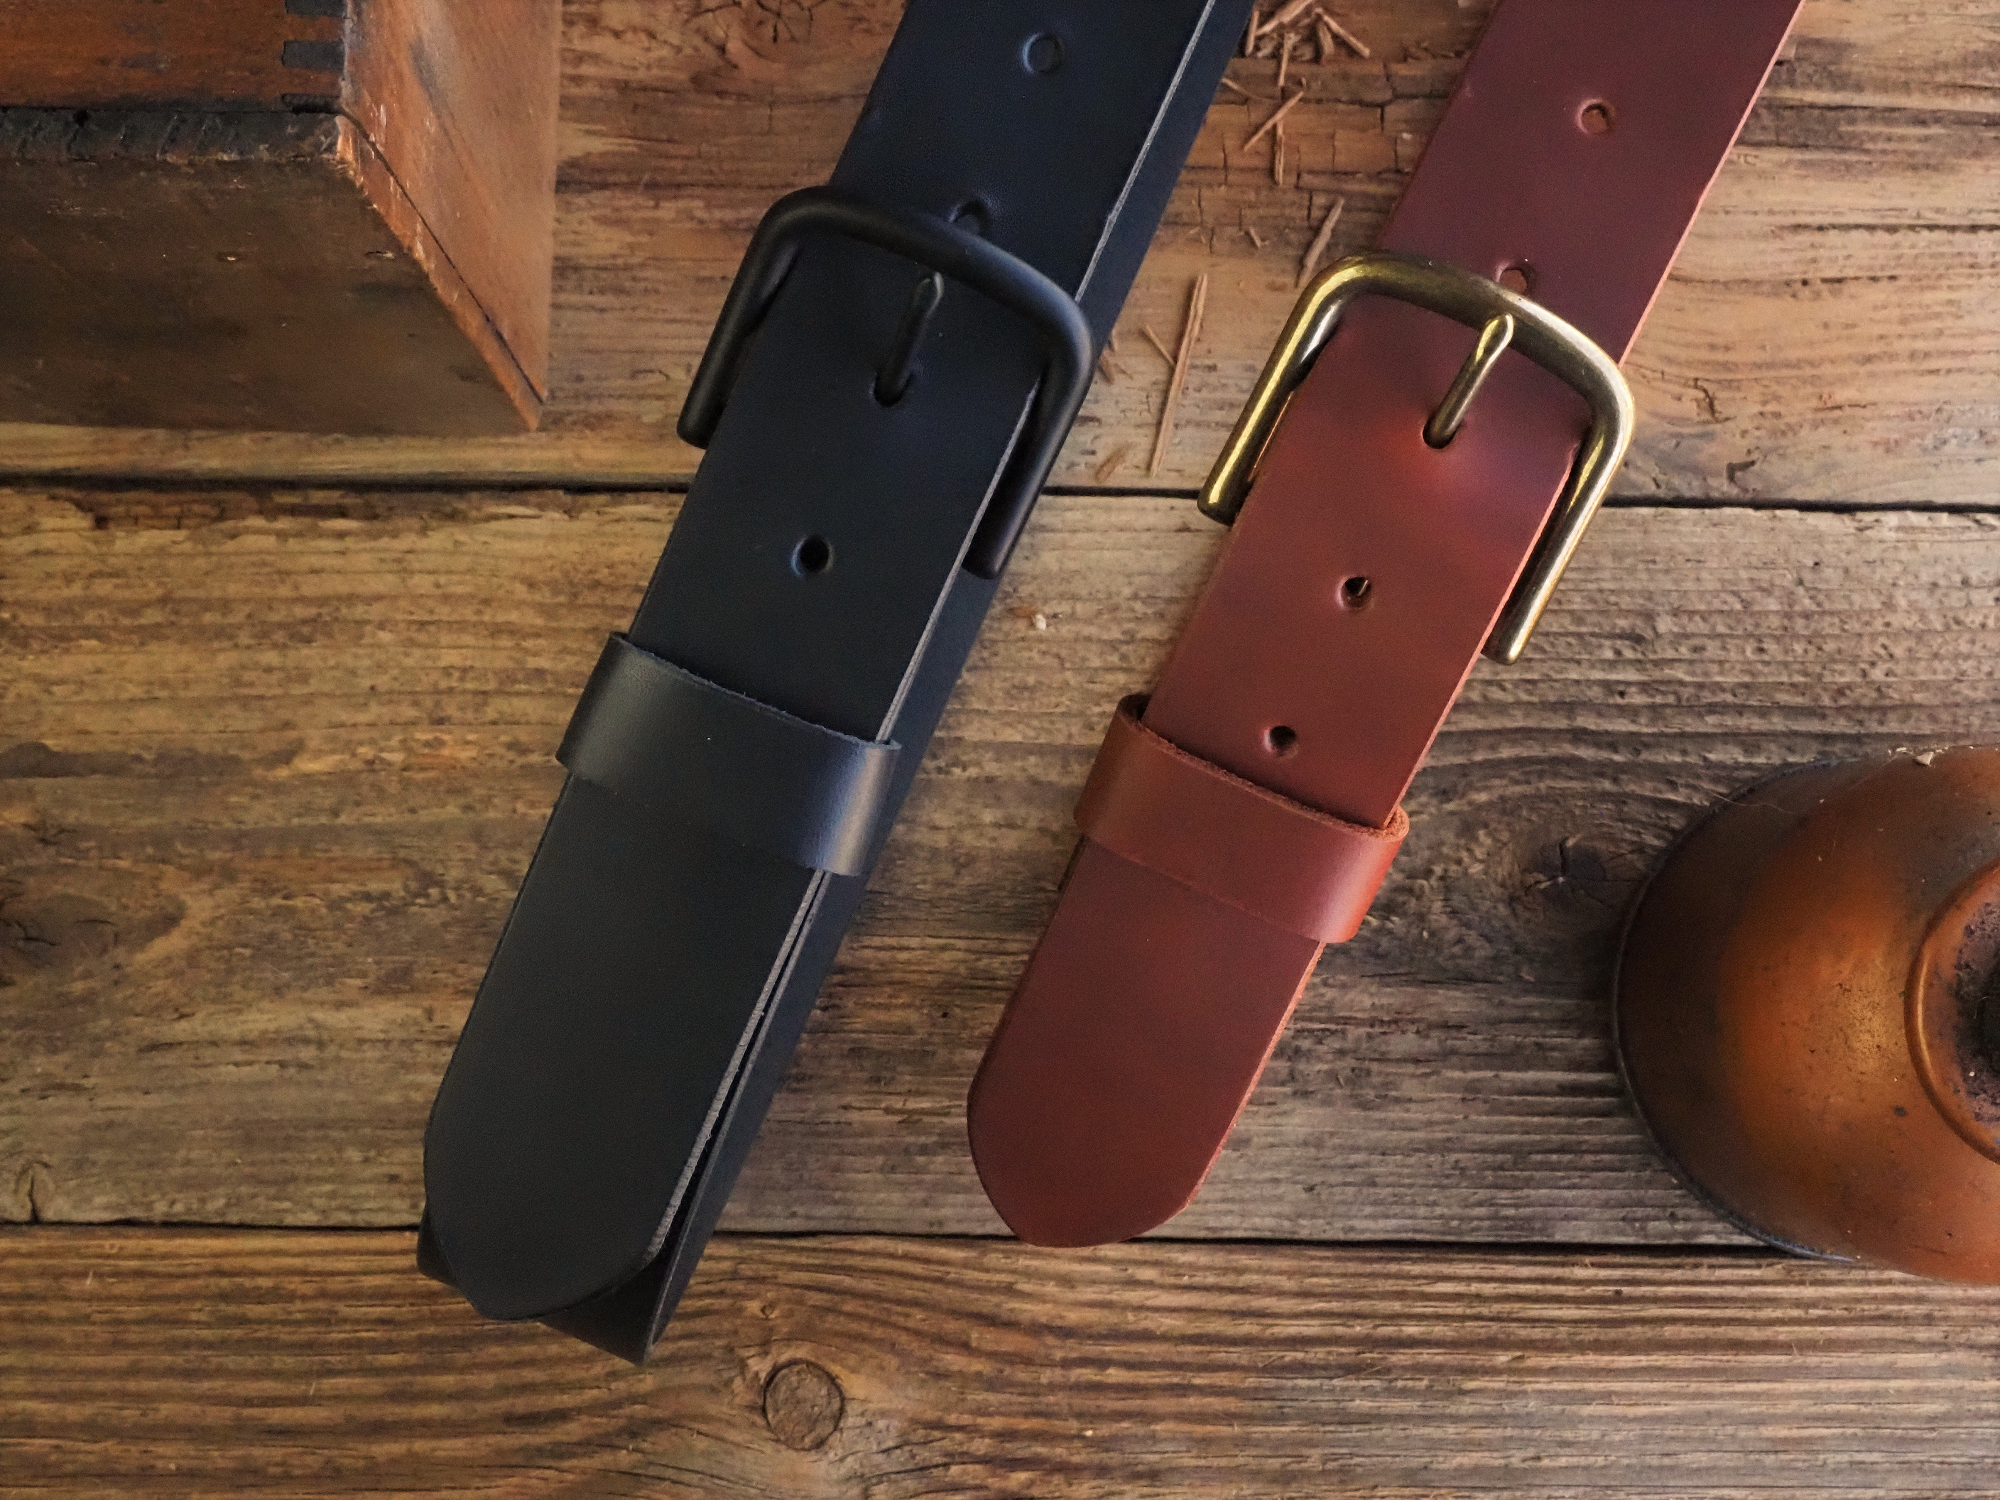 Personalized Leather Belt - Made in American - Bridle Leather Belts - Holtz  Leather